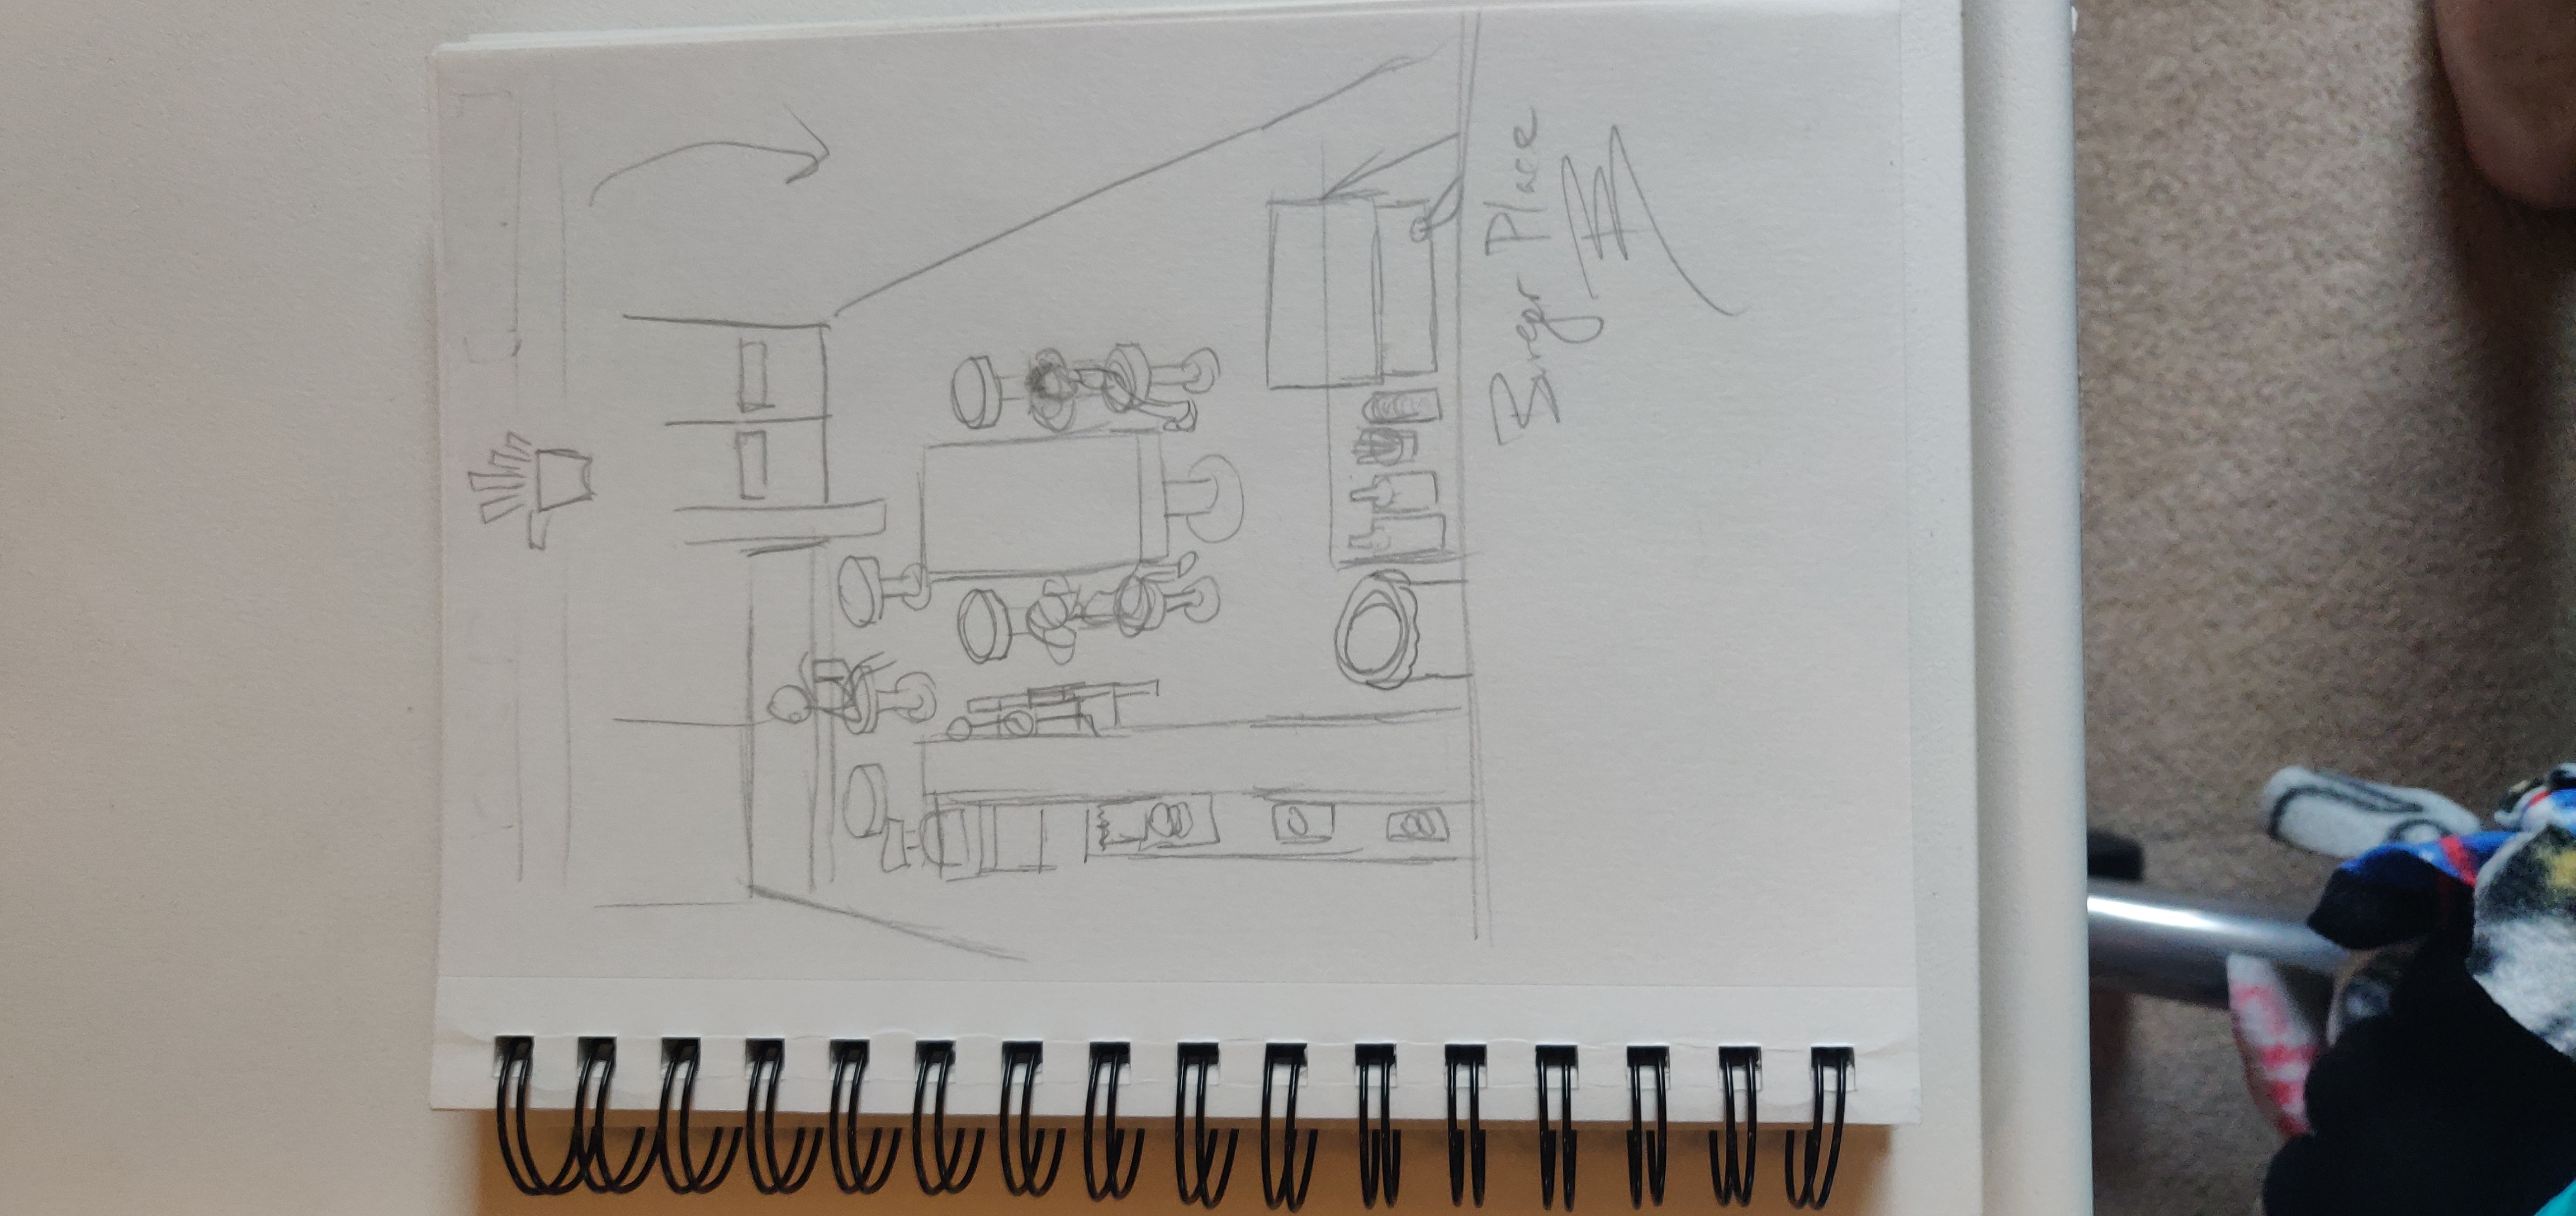 The Burger Joint (First Place Sketches)